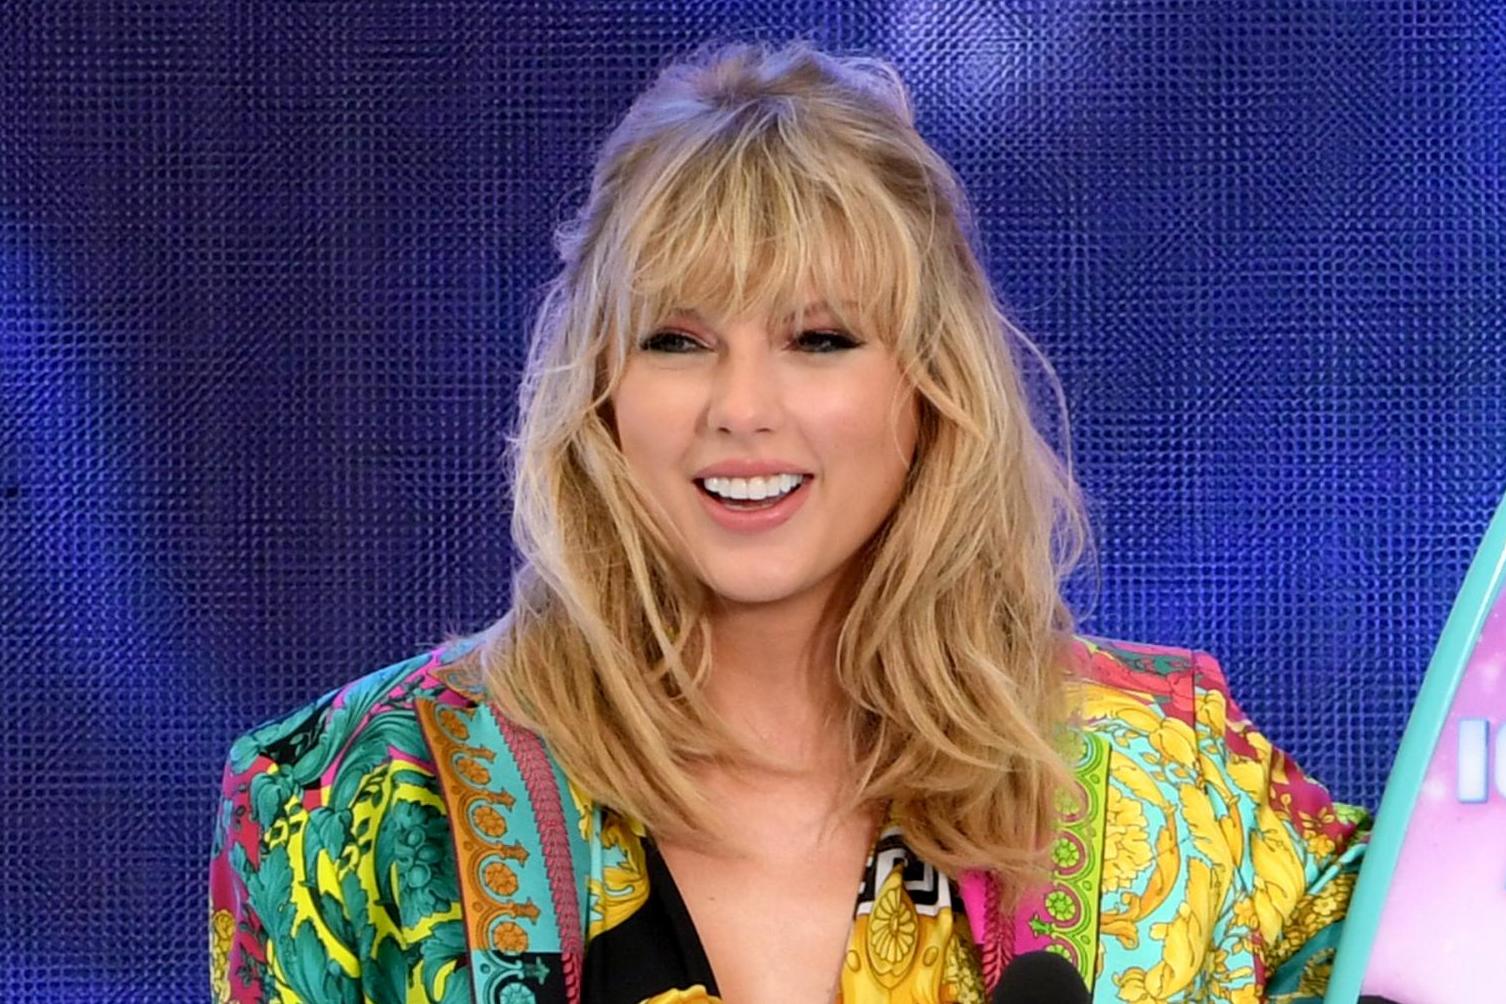 Taylor Swift at the Teen Choice Awards in 2019